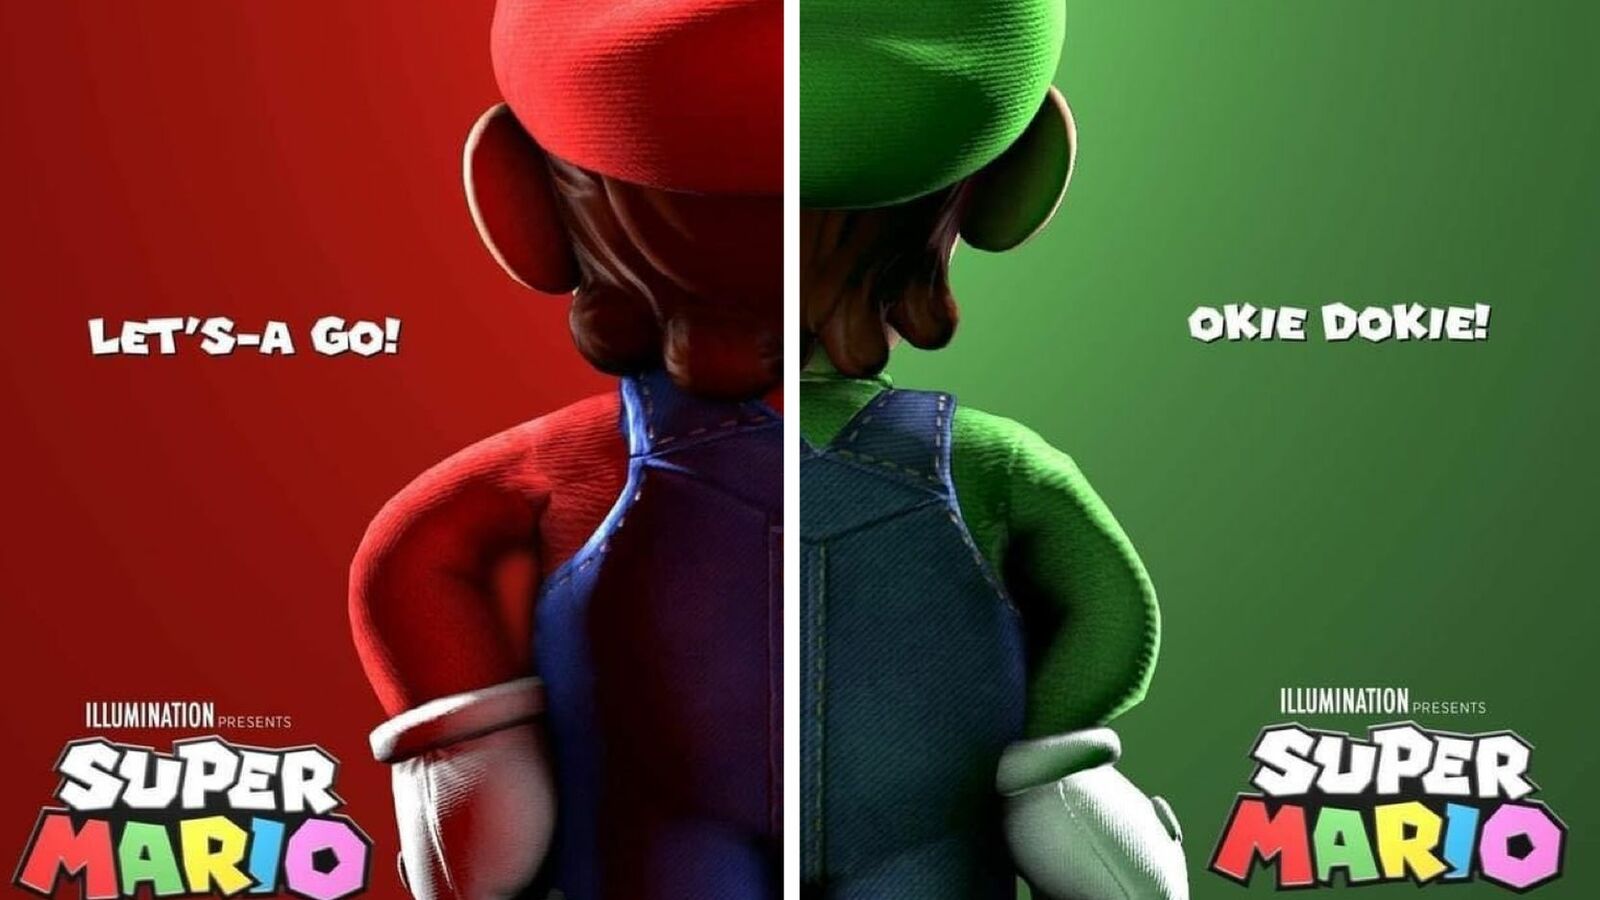 Next Nintendo Direct to debut world premiere trailer for the Super Mario Bros. movie